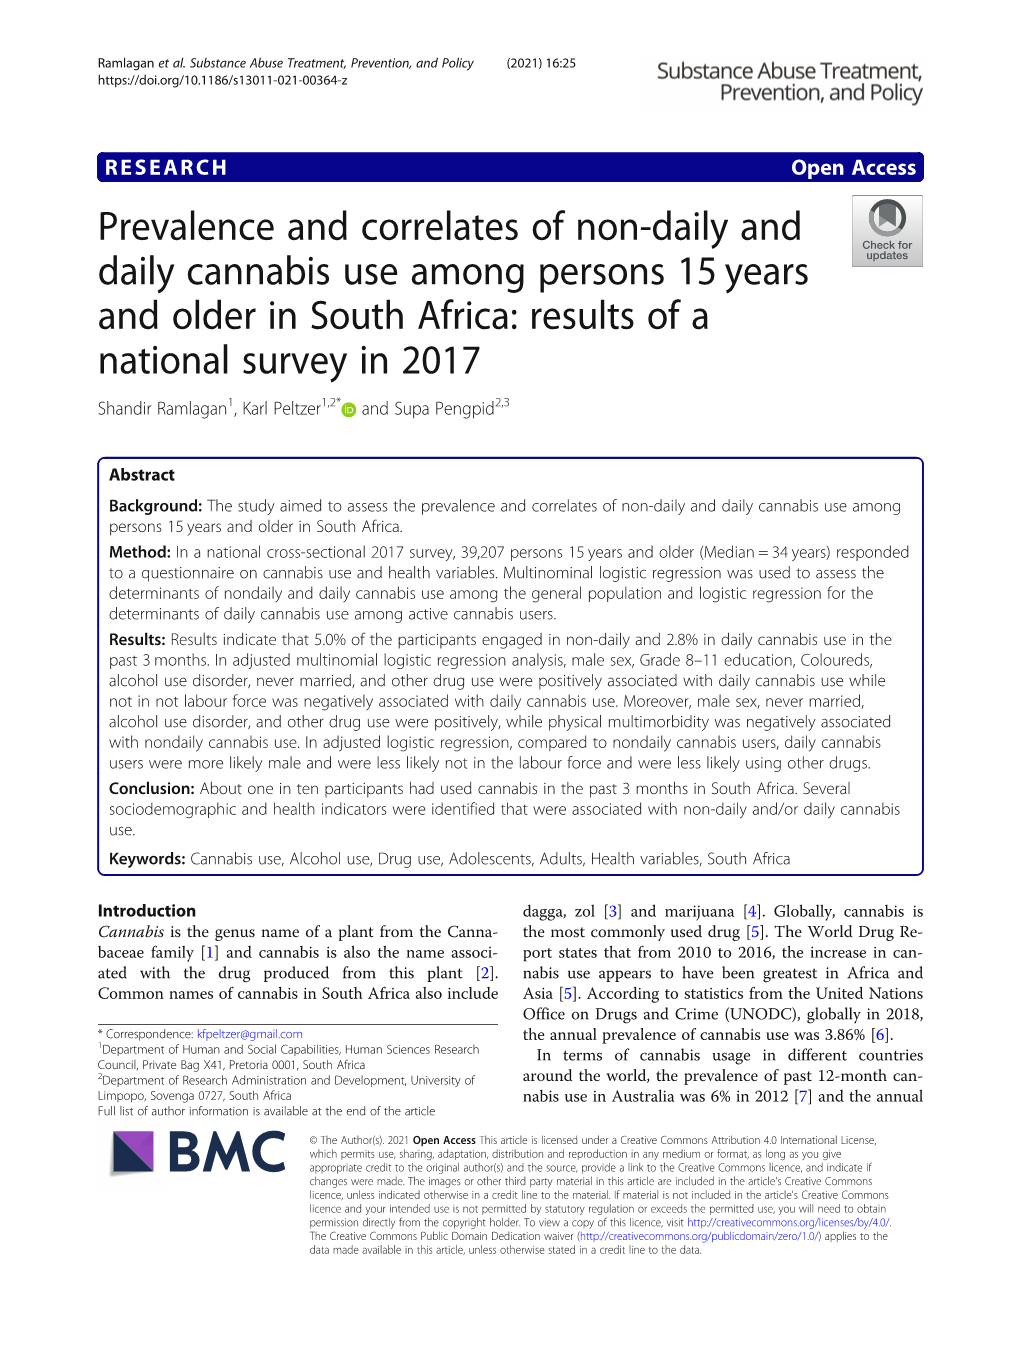 Prevalence and Correlates of Non-Daily and Daily Cannabis Use